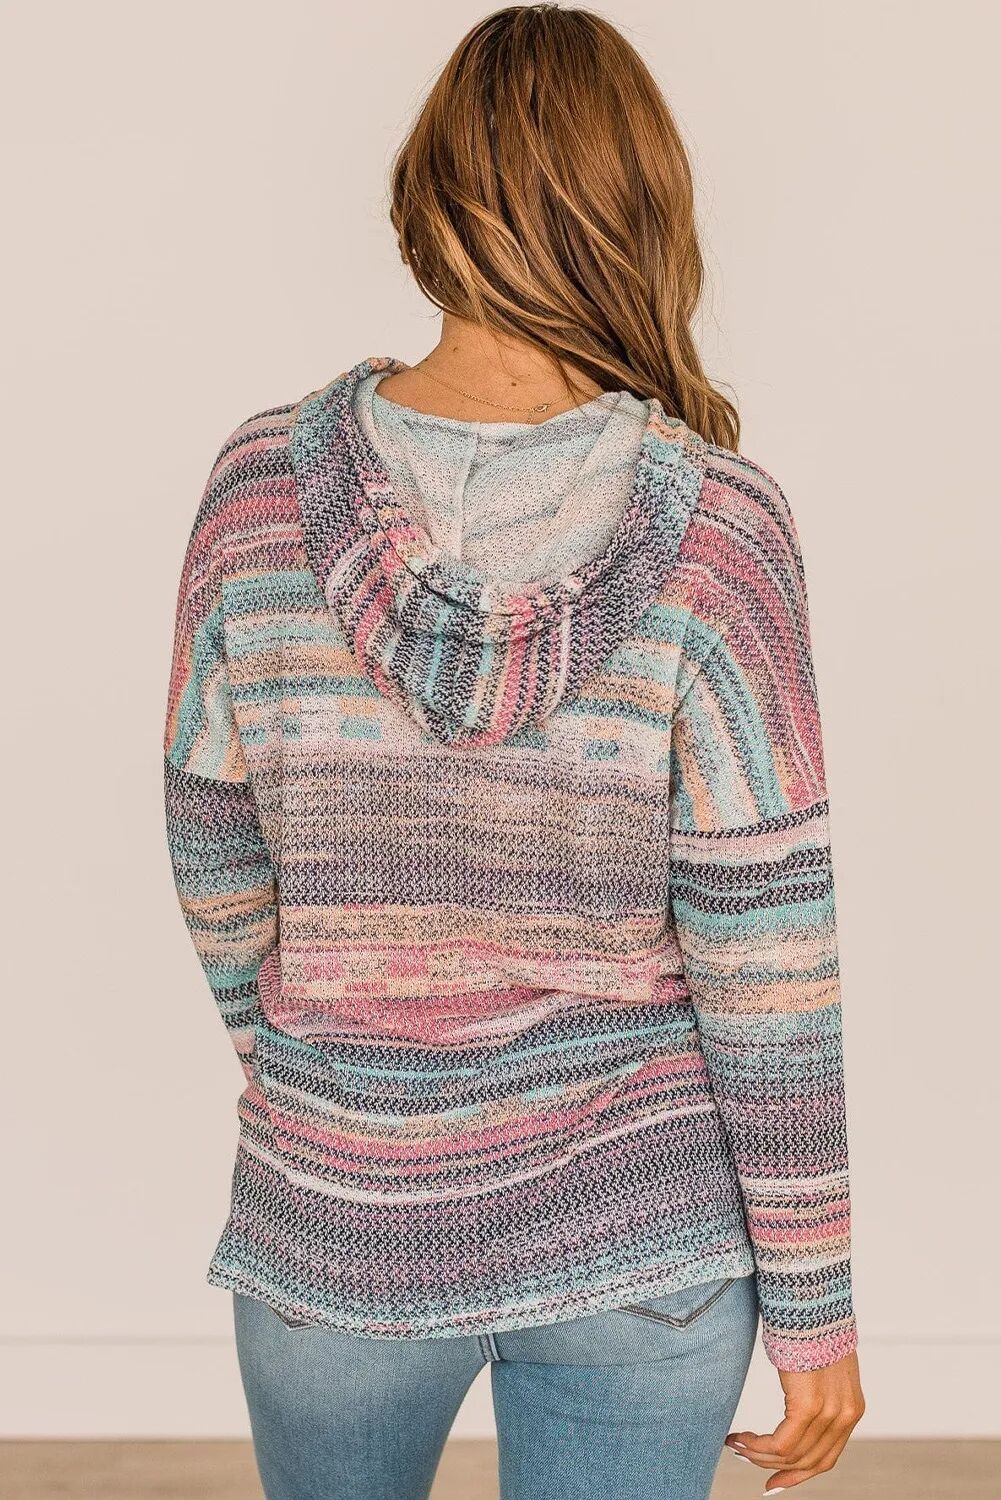 Striped Printed Round Neck Pullover Casual Top Women